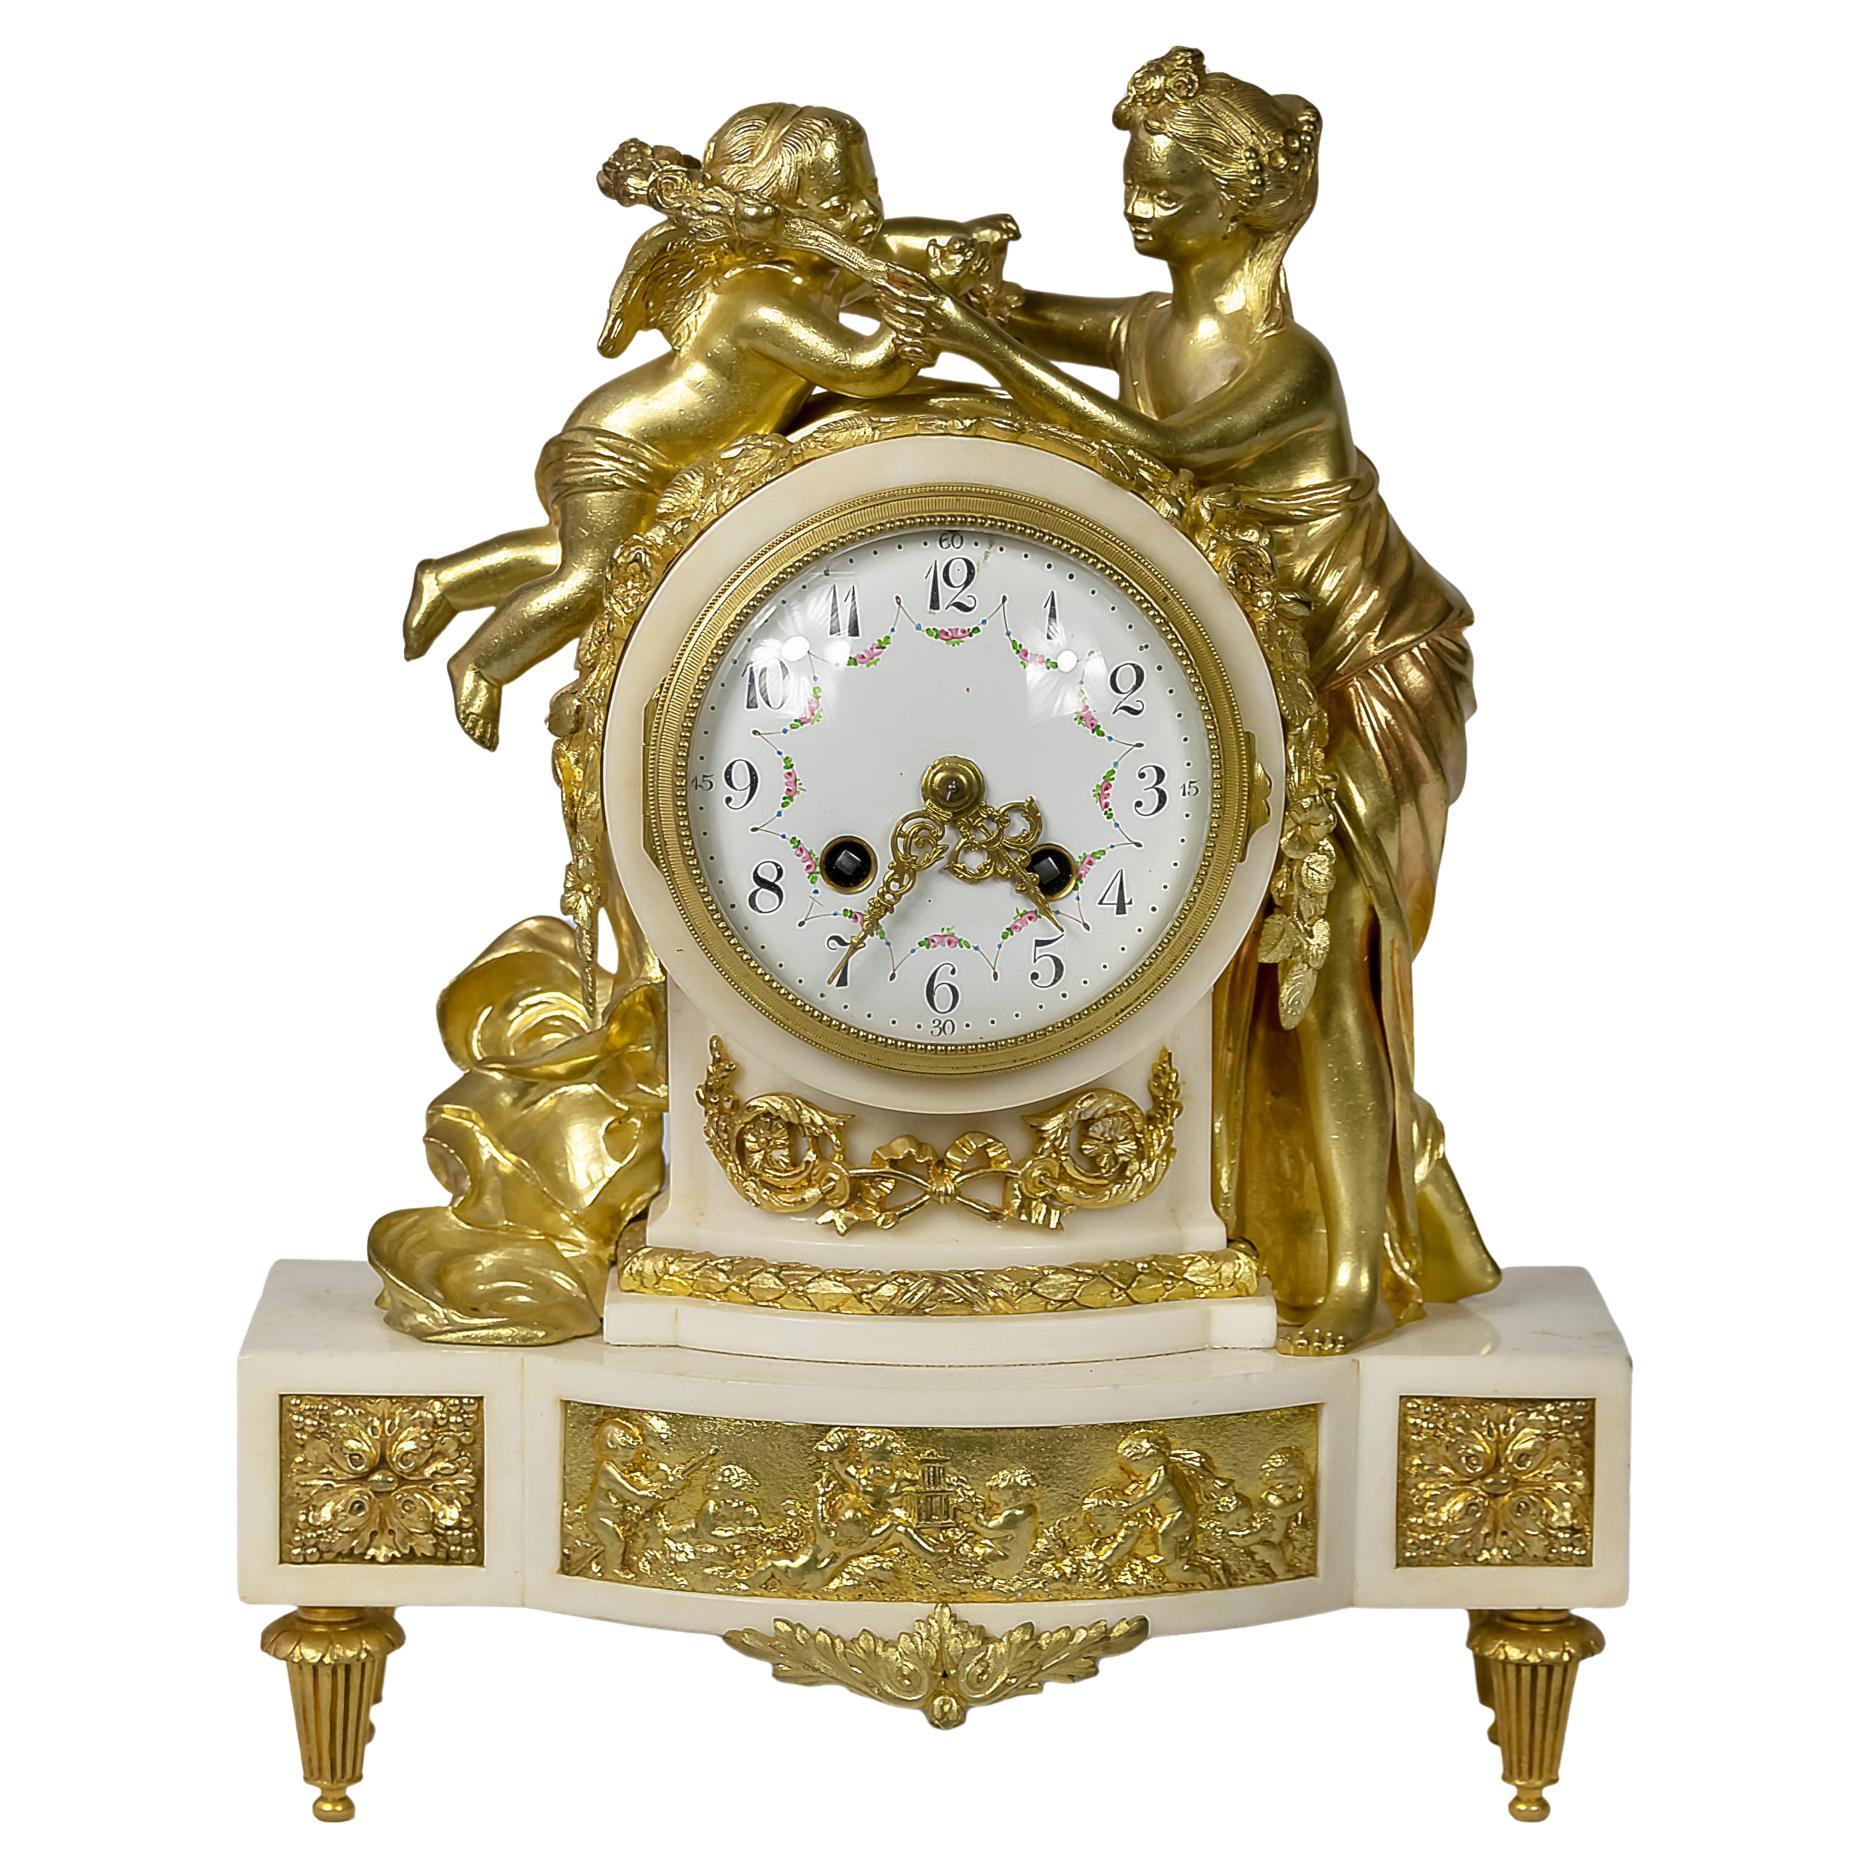 French 19th Century Louis XVI Gilded Bronze and Marble Mantel Clock